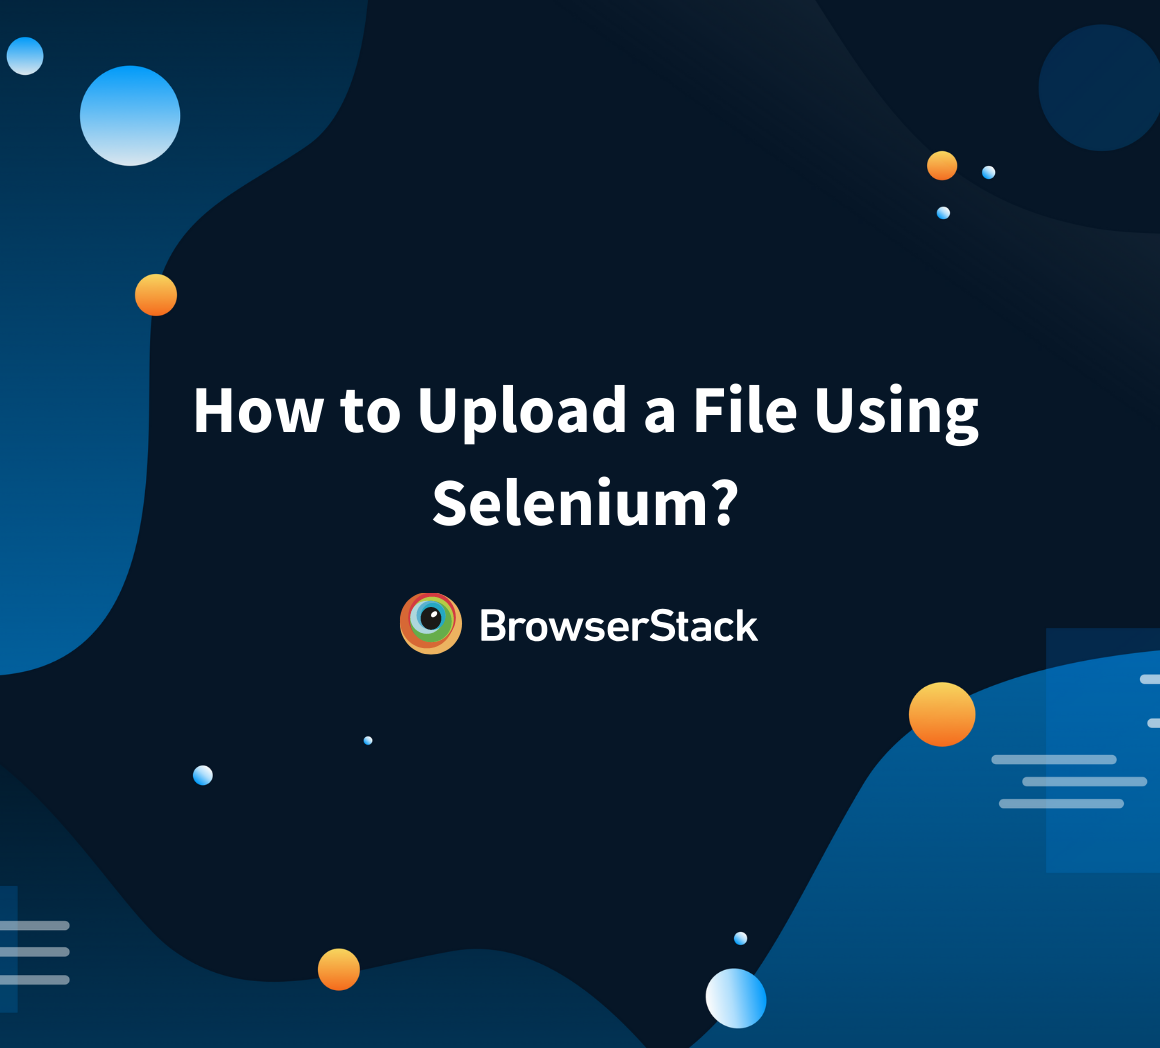 How to upload a file in Selenium